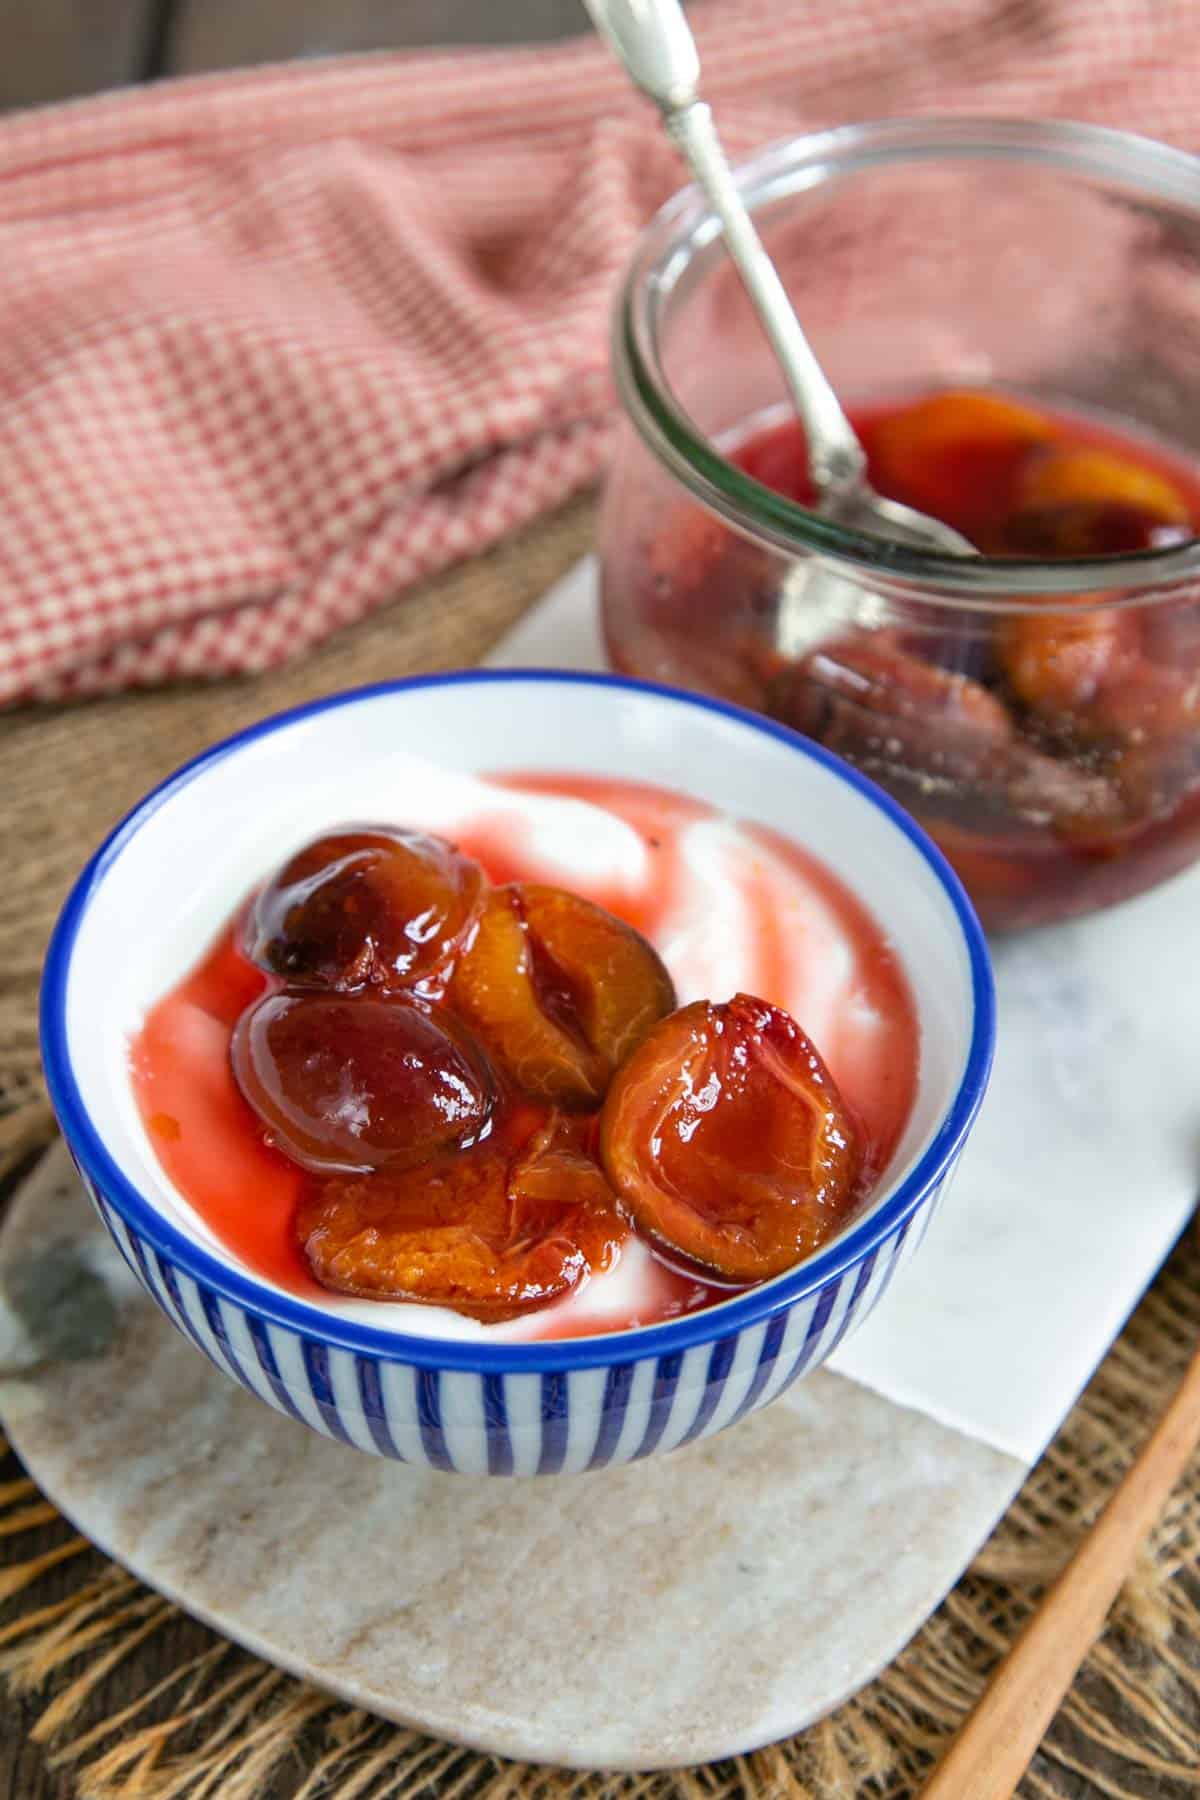 Stewed plums in their juice, served on a helping of yoghurt. More cooked plums are in a jar in the background.